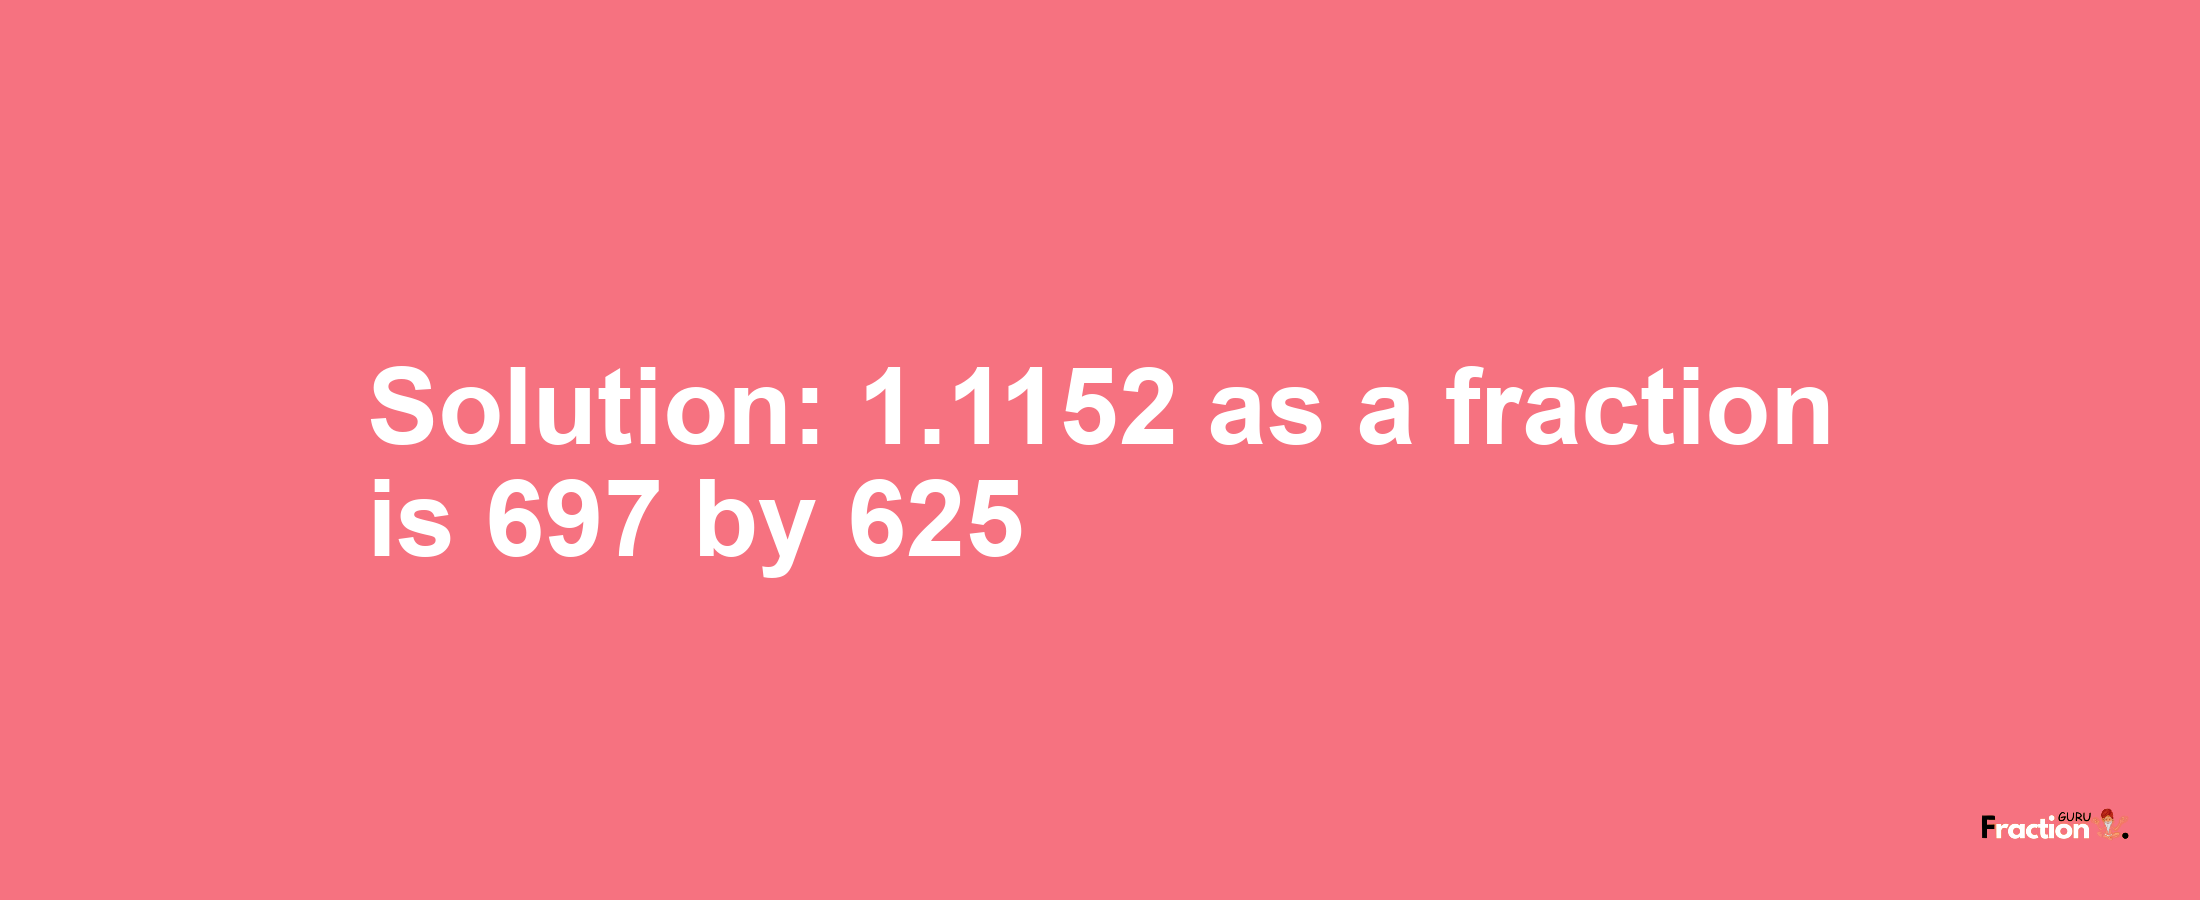 Solution:1.1152 as a fraction is 697/625